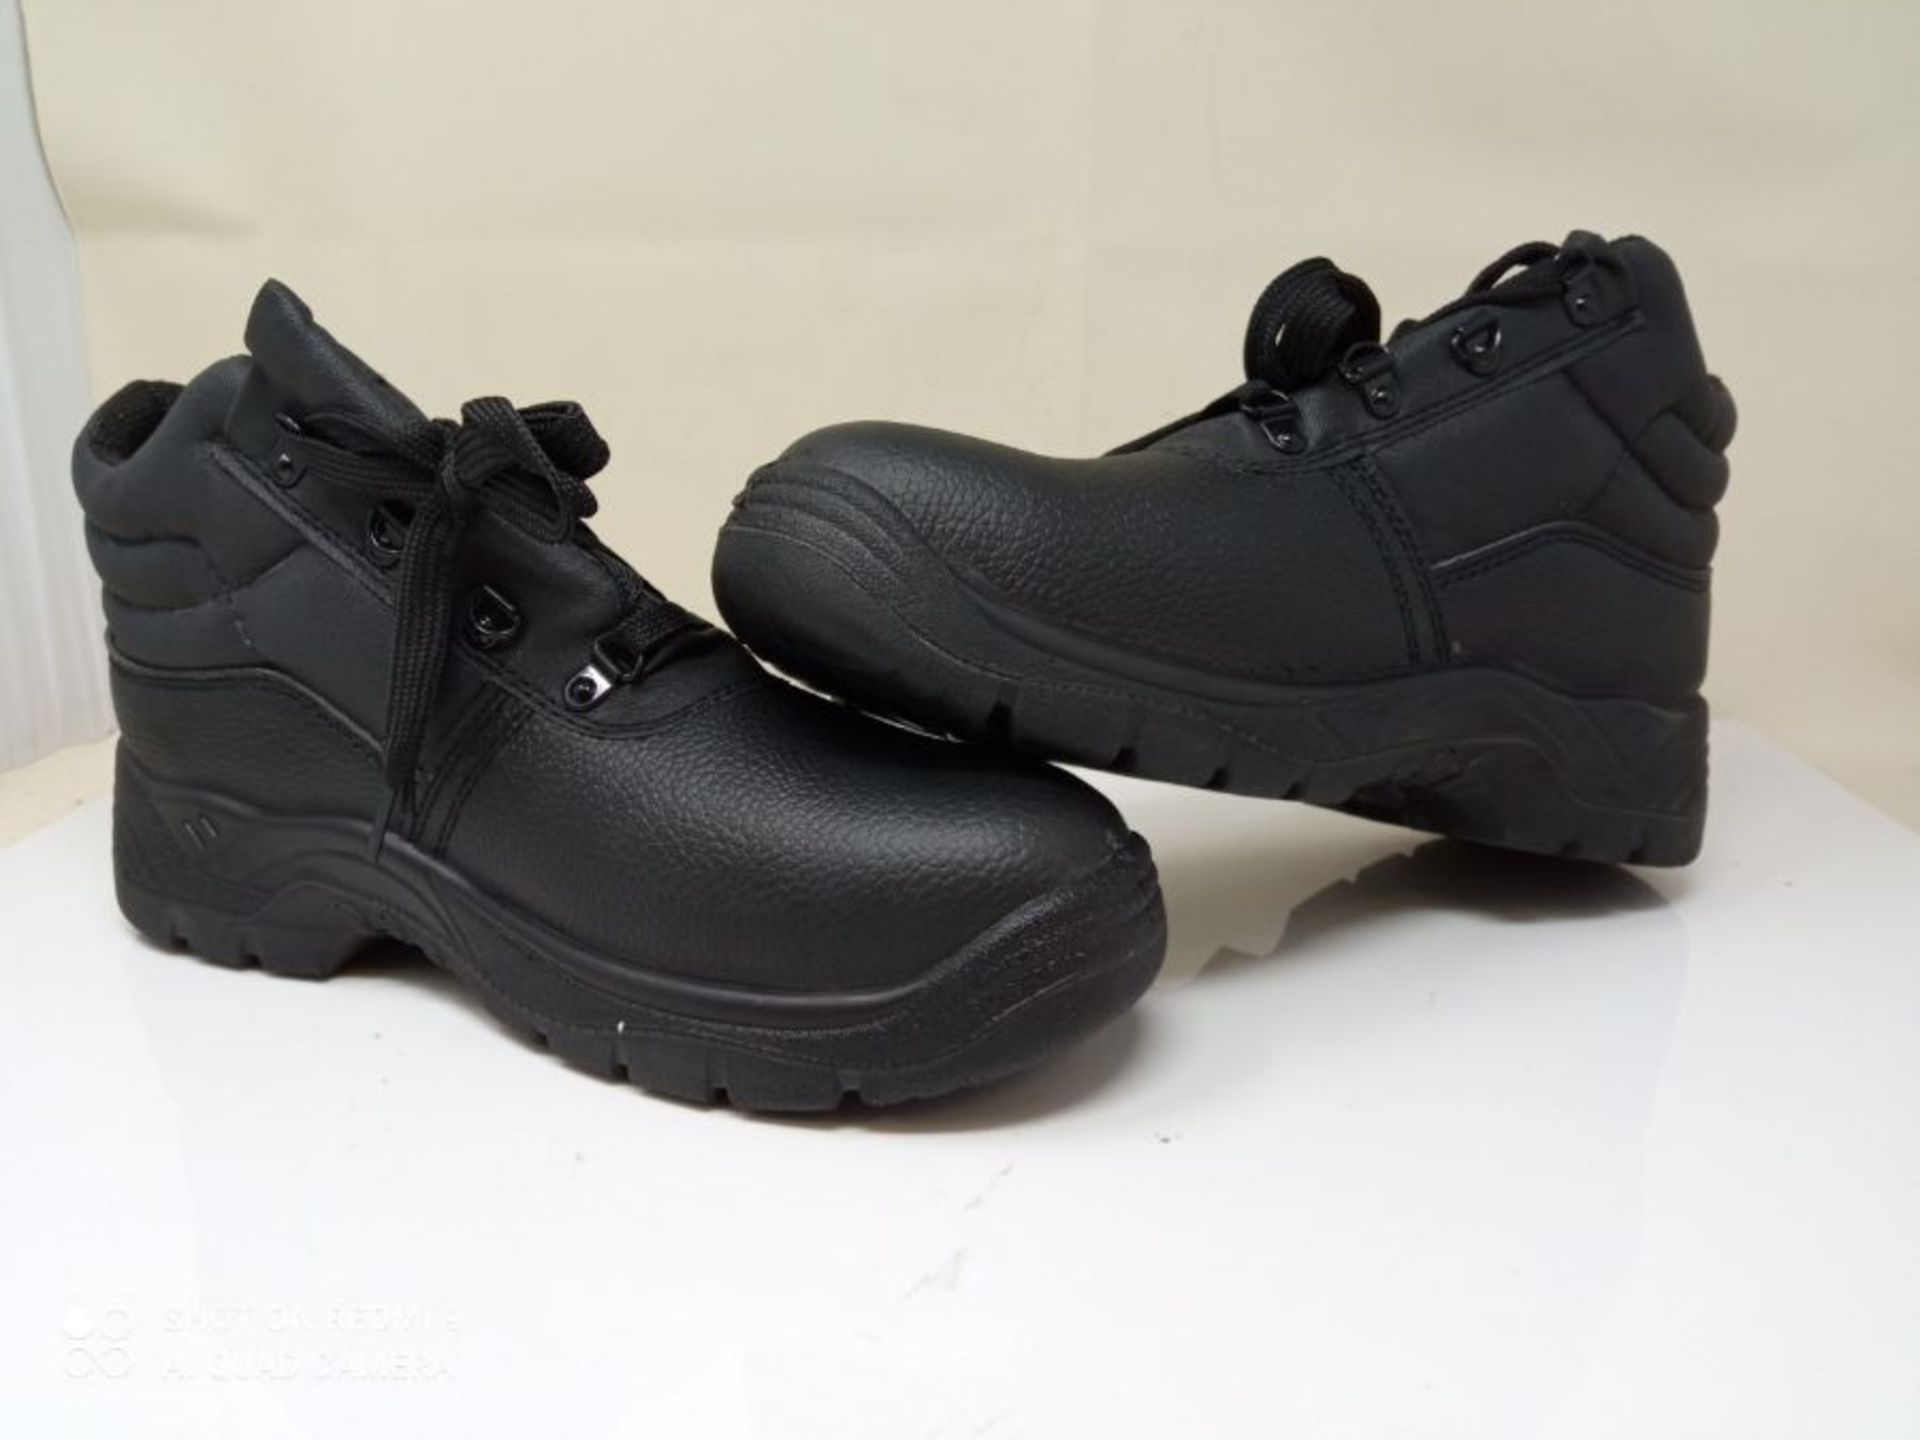 Blackrock Black Leather Work Safety Chukka Boots With Steel Toe Caps And Midsole (UK8 - Image 3 of 3